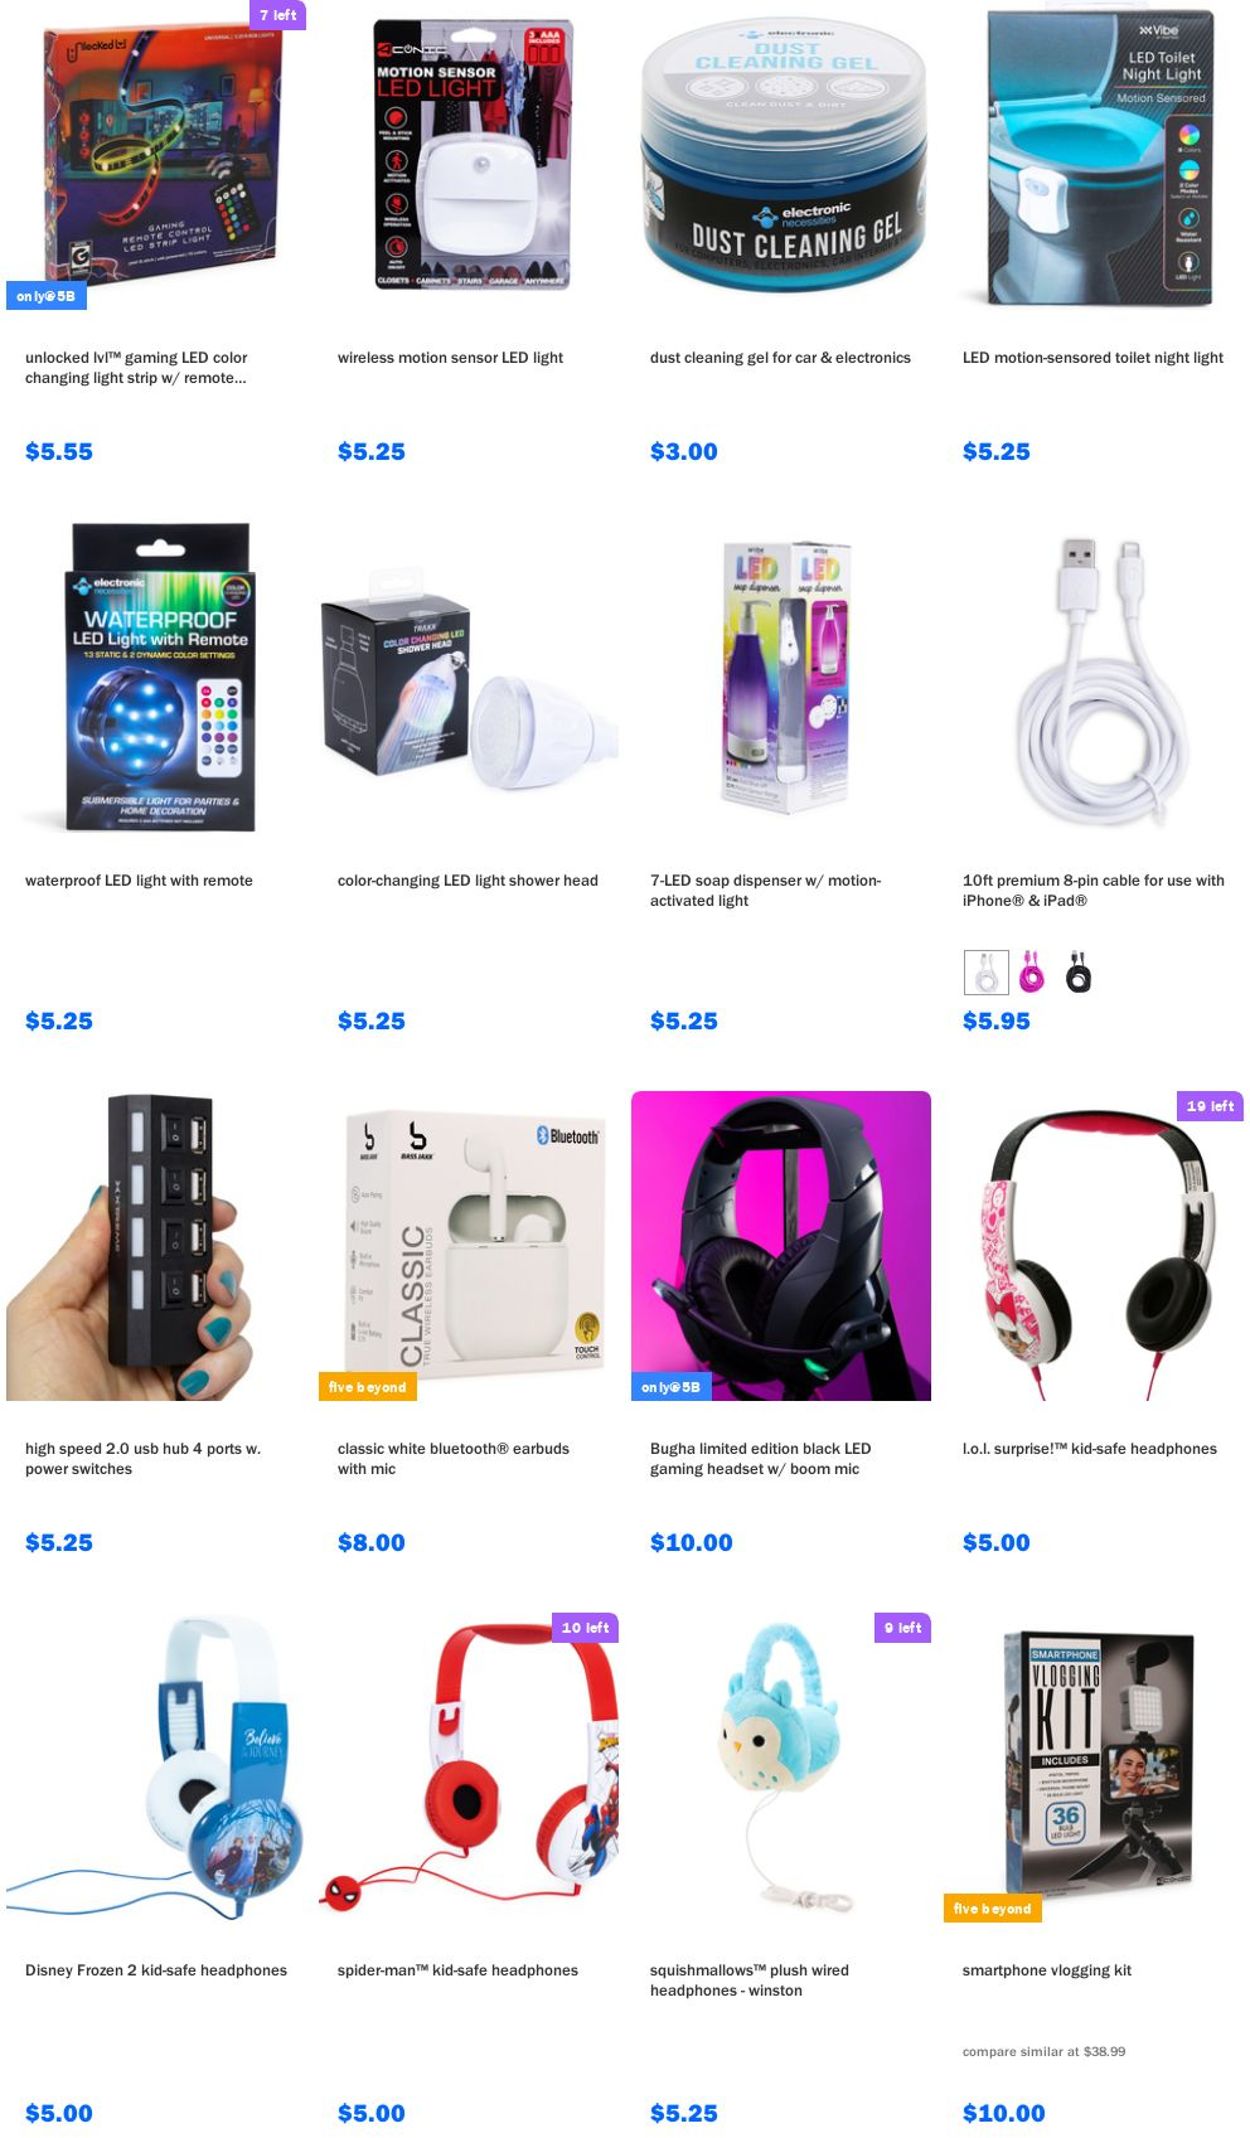 Catalogue Five Below EASTER AD 2022 from 04/13/2022